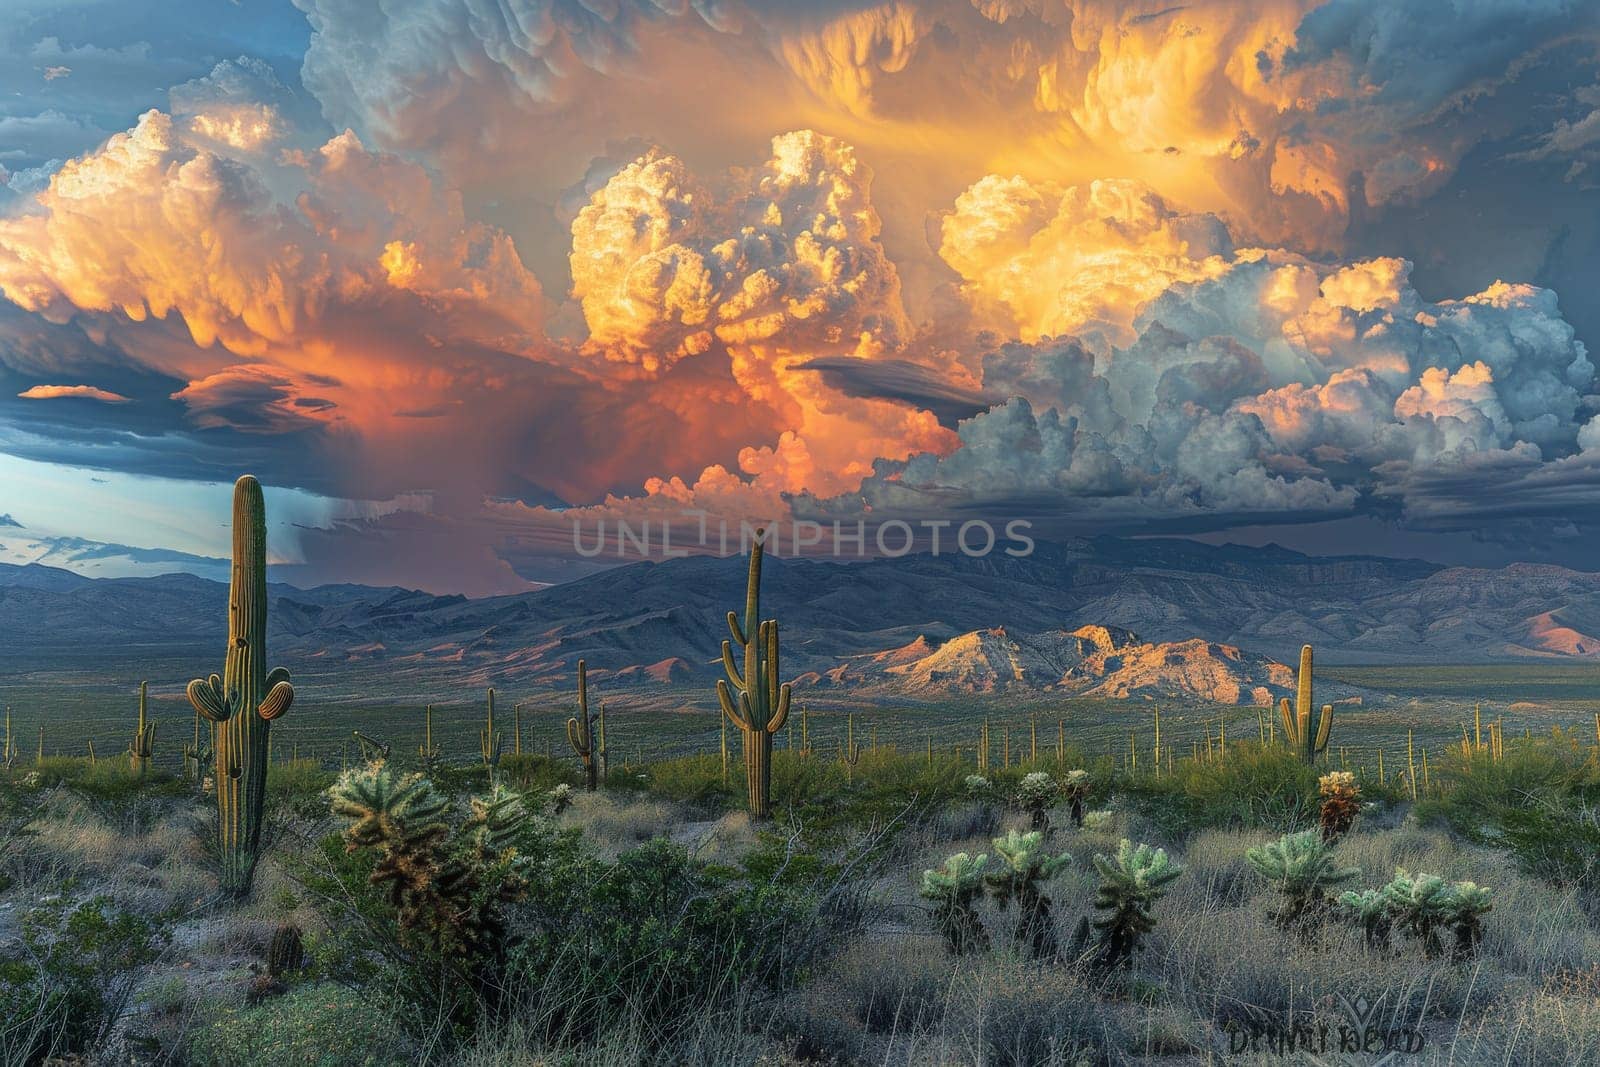 A desert landscape with a large cloud in the sky. The sky is orange and the clouds are white